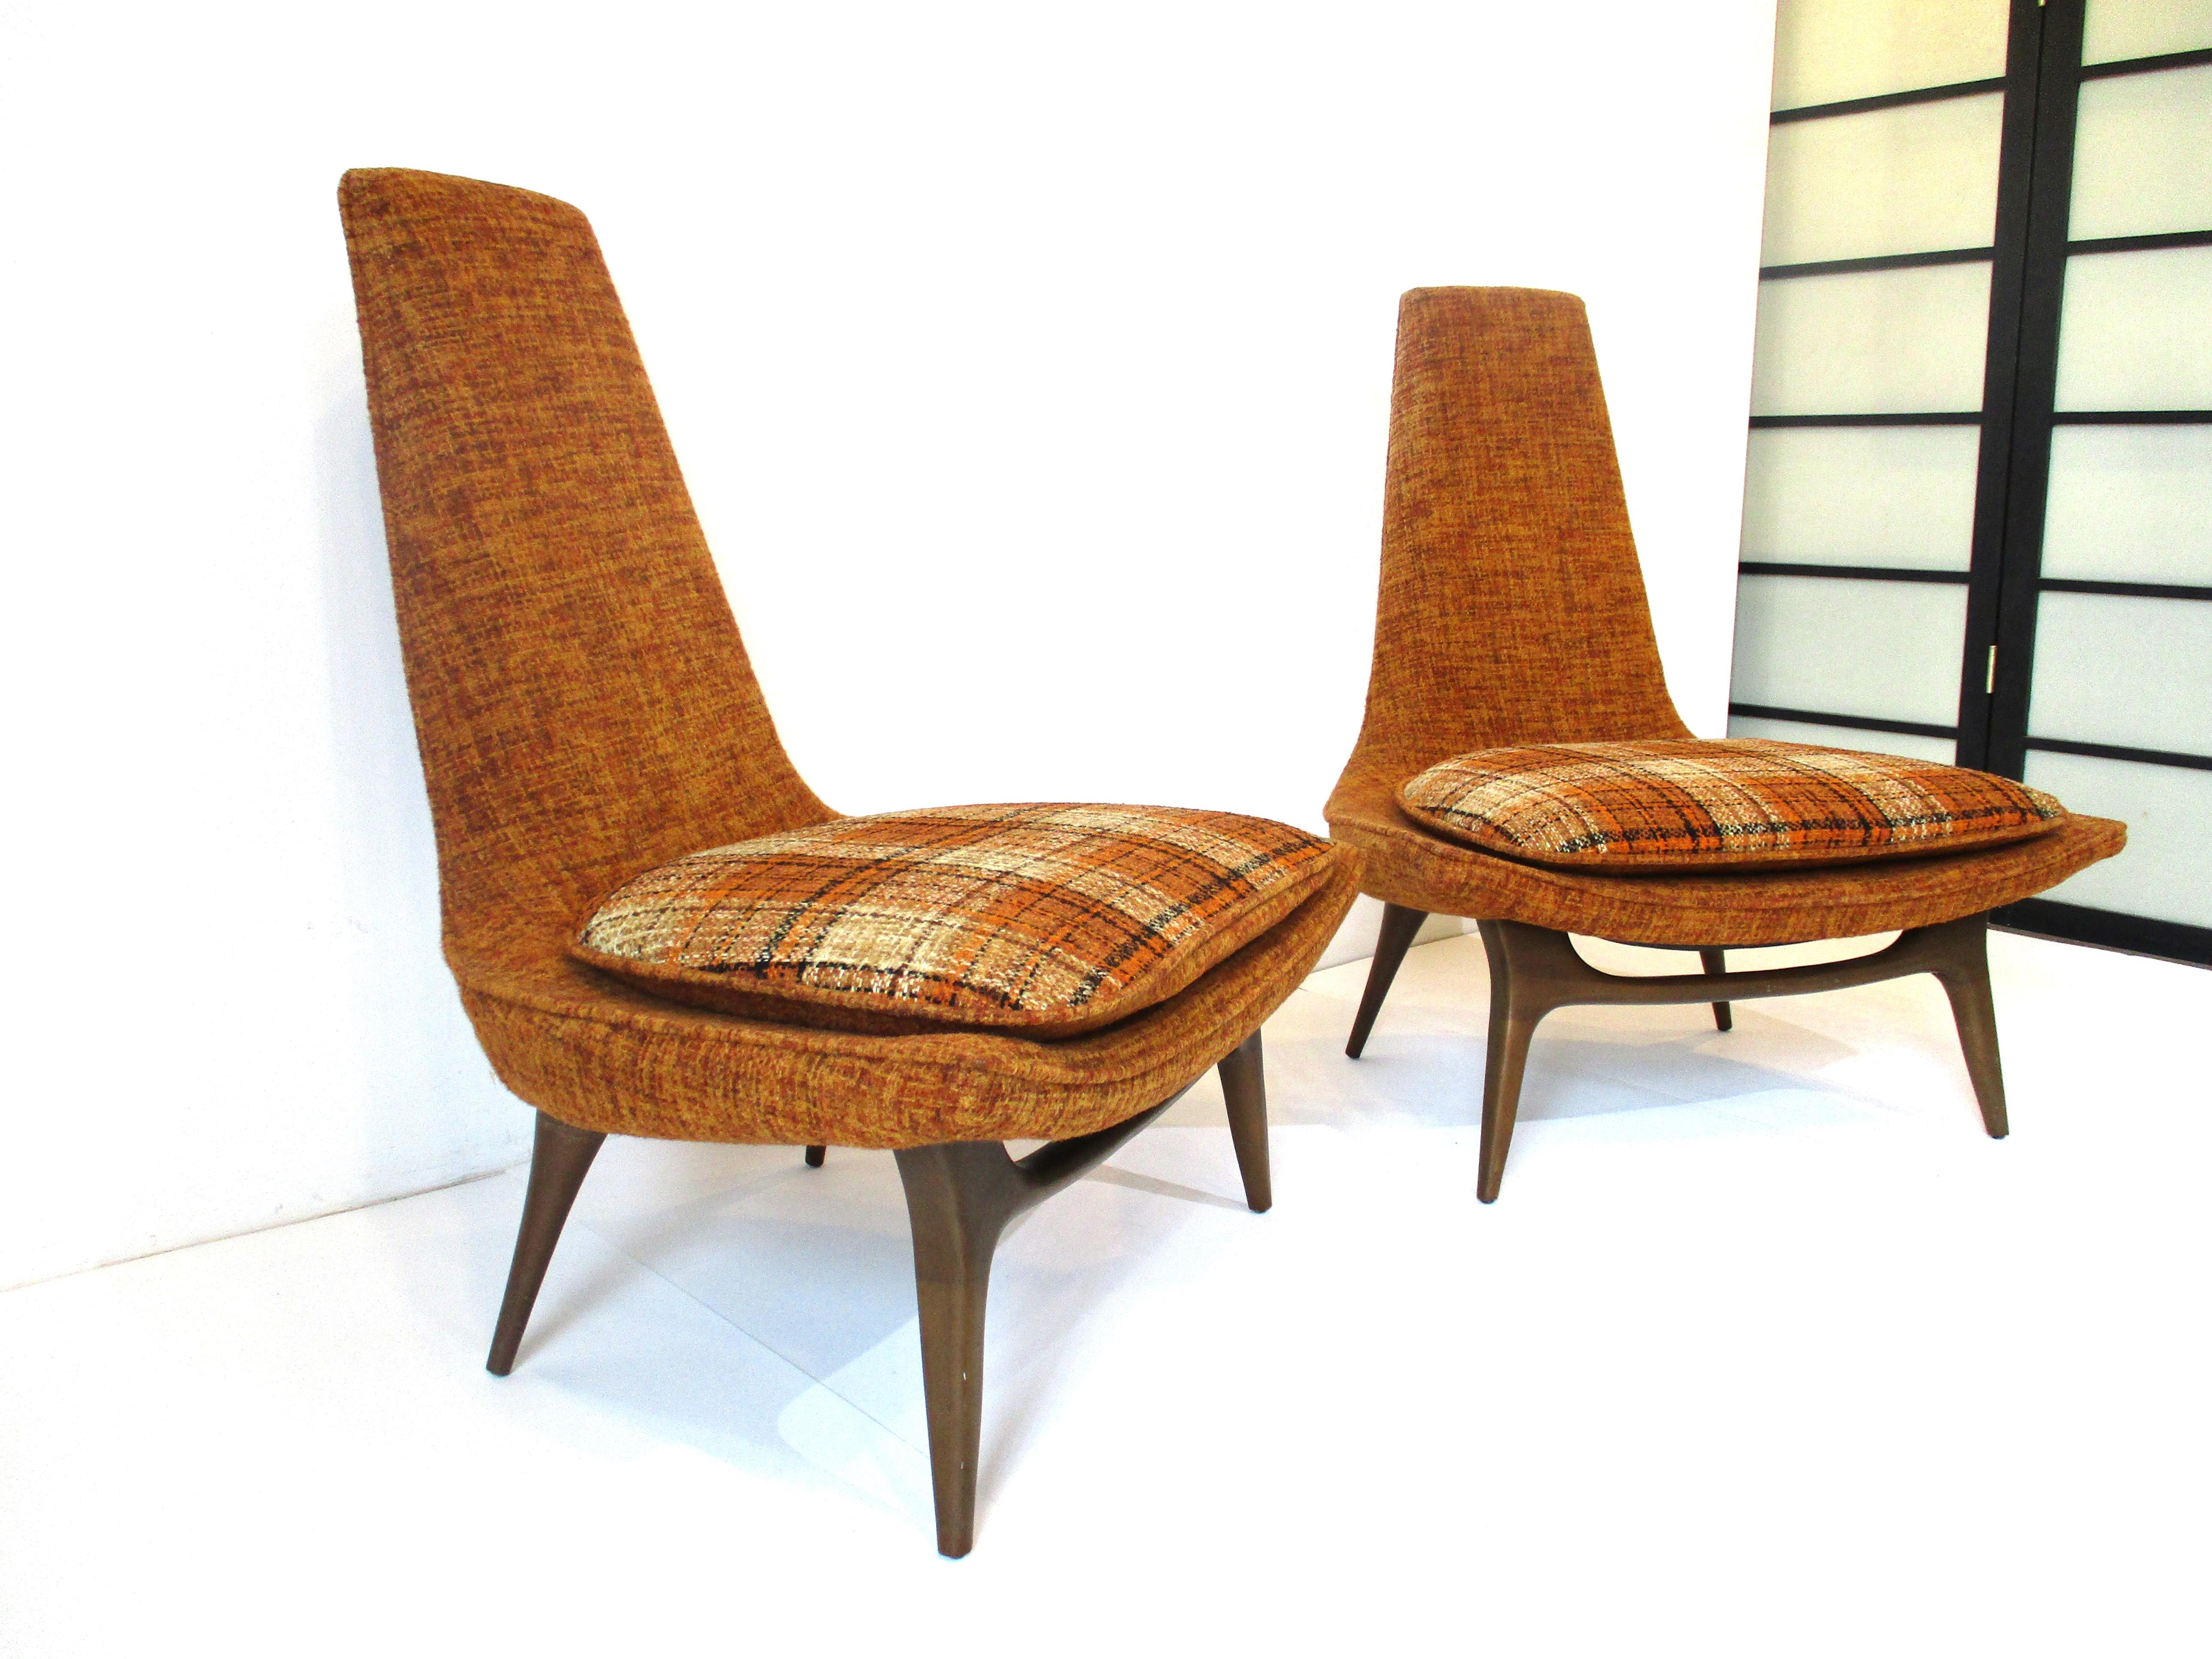 A very sculptural pair of midcentury Slipper lounge chairs in the original fabric which is in super condition. The legs are in a dark toned wood having a wide loose bottom cushion and high back for comfort. These chairs will make a statement in any